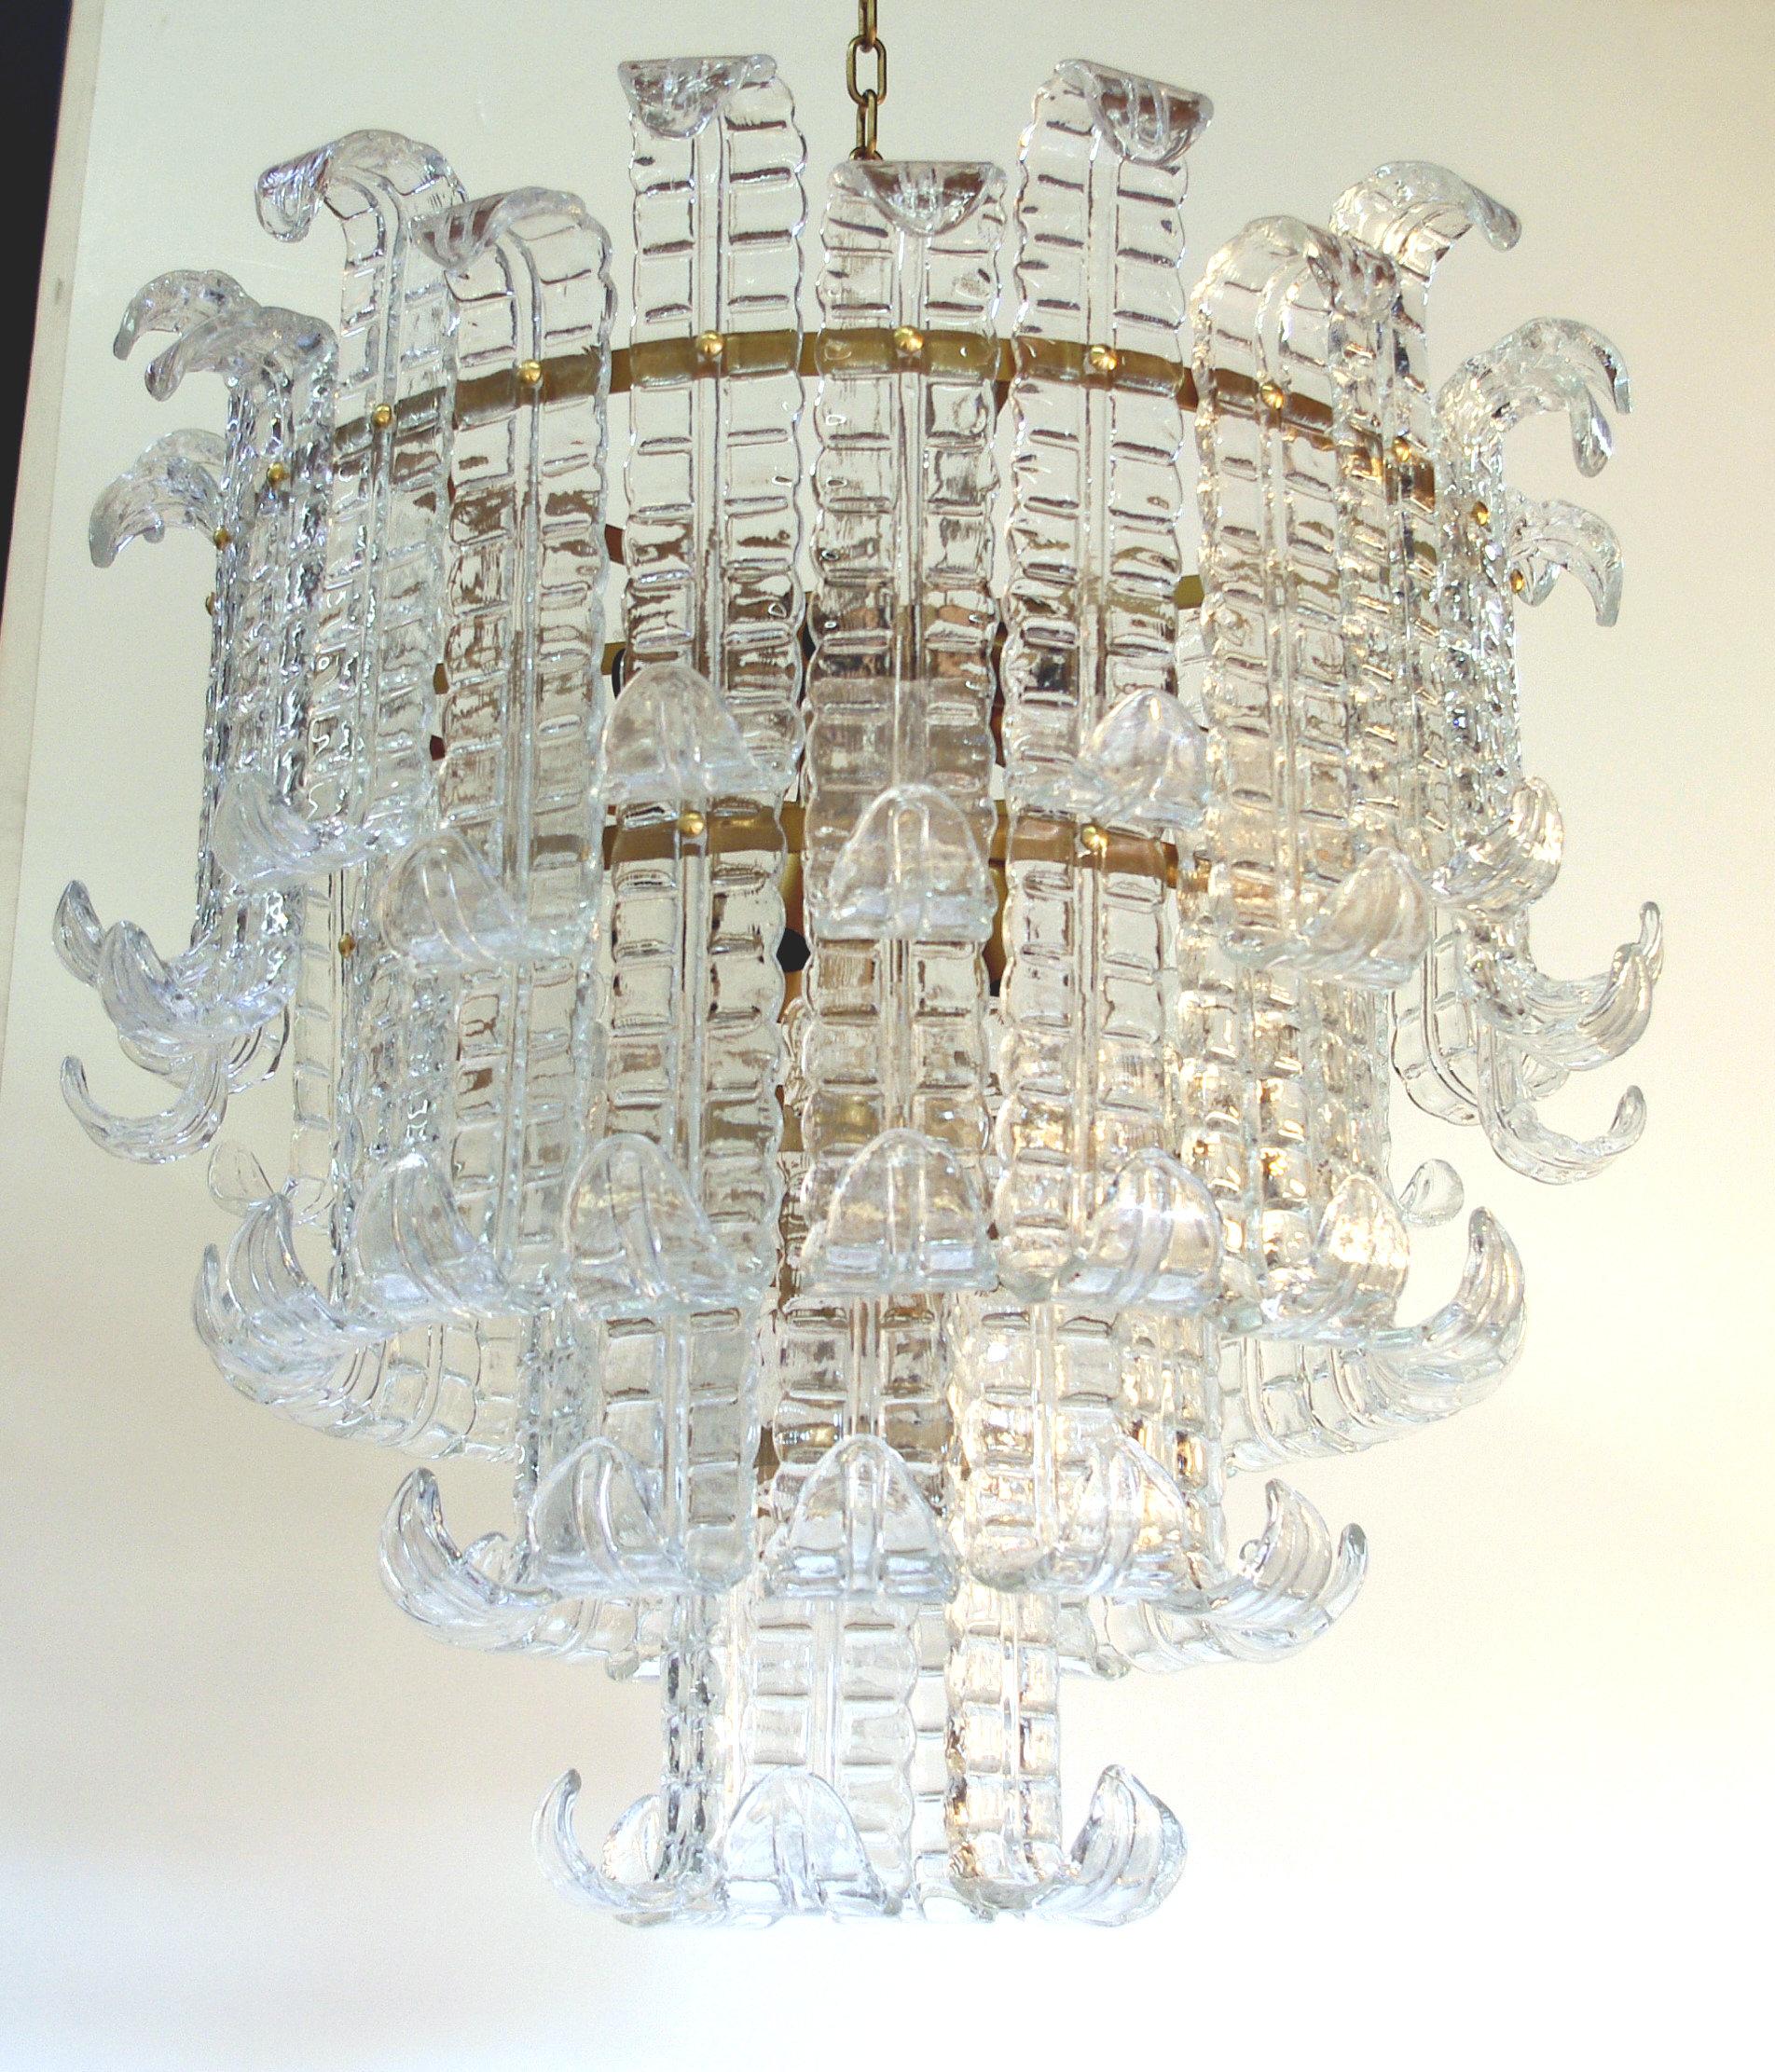 Italian chandelier shown with four tiers of clear hand blown Murano Felci fern glasses mounted on bronzed finish metal frame, by Fabio Ltd / Made in Italy
10 lights / E26 or E27 type / max 60W each
Diameter: 31.5 inches / Height: 27.5 inches plus